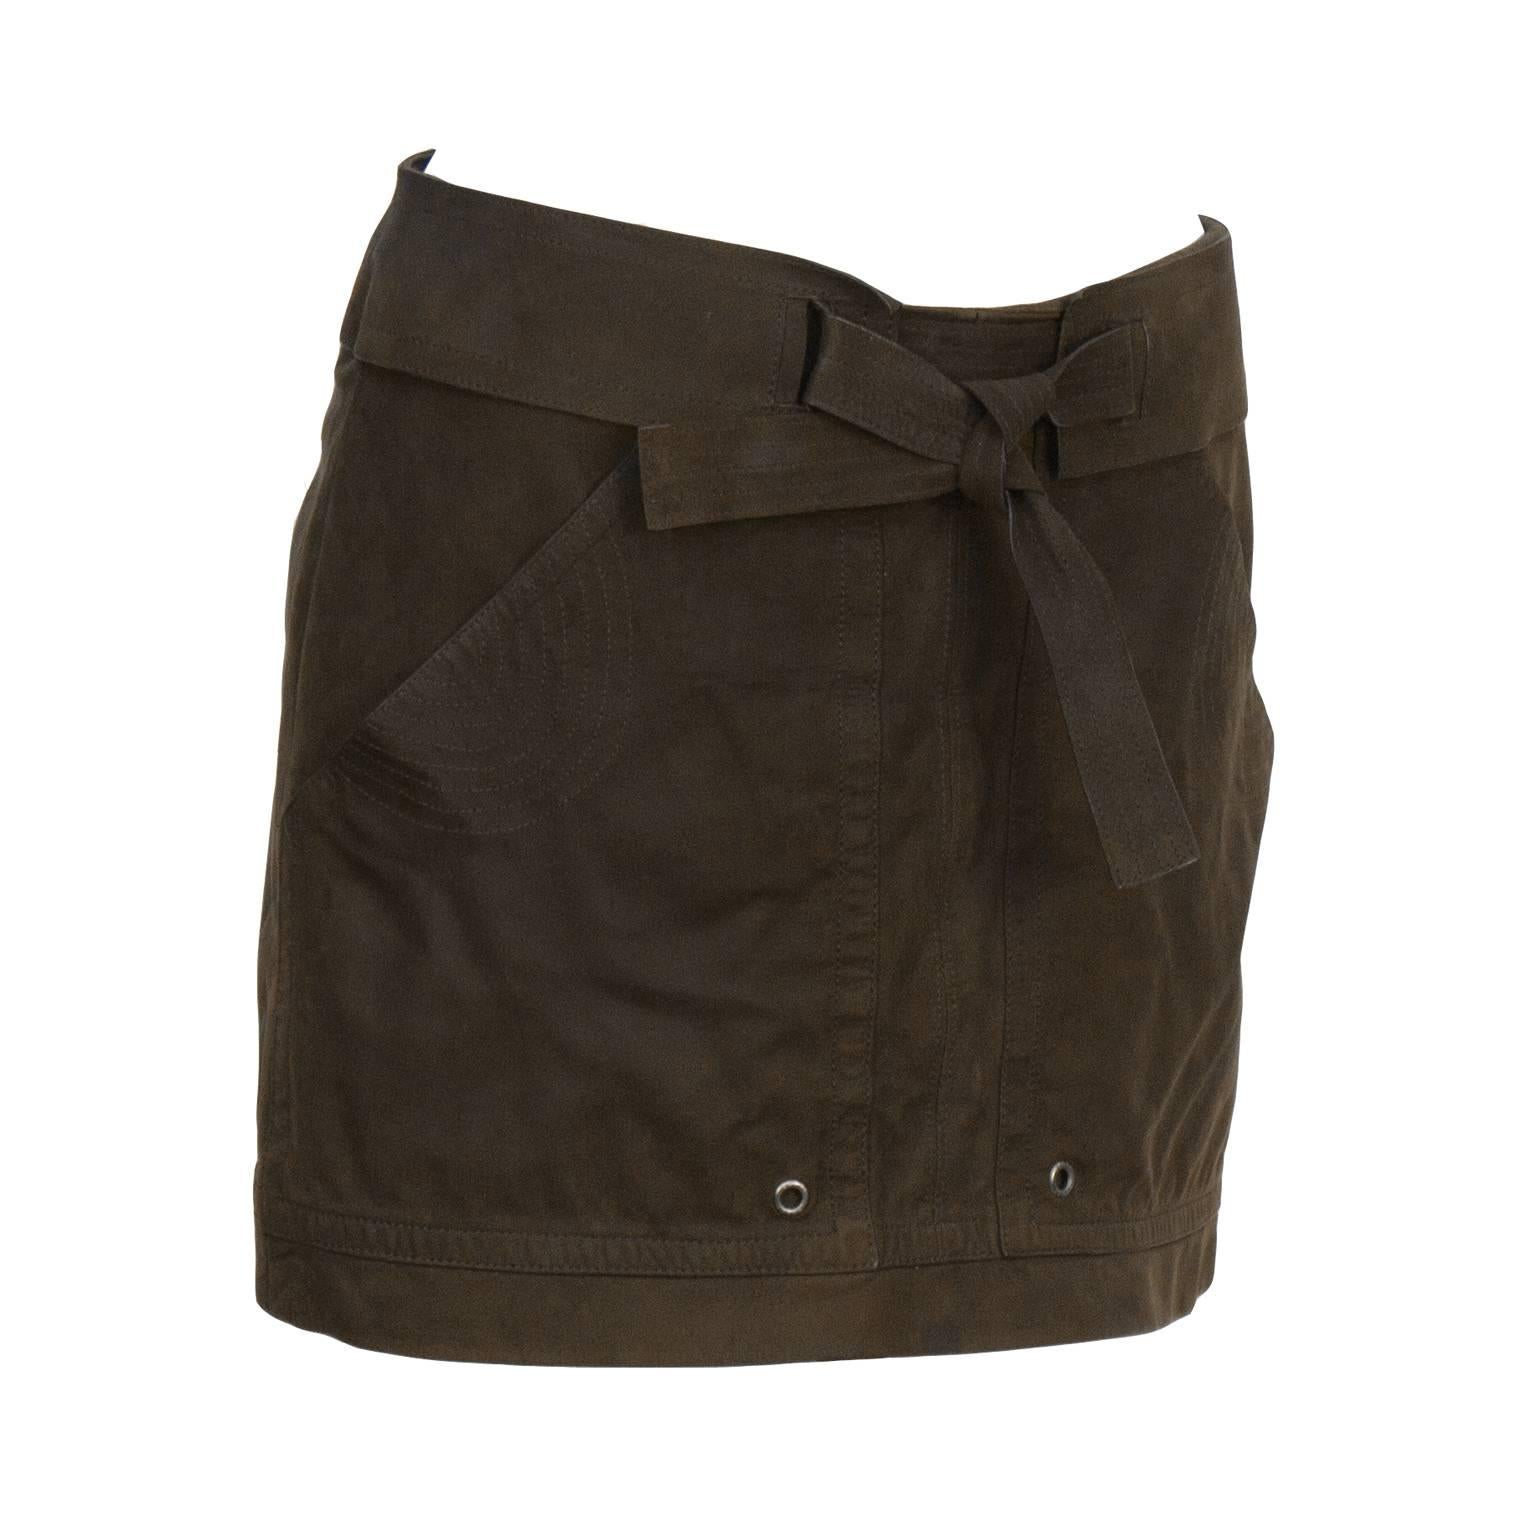 Gucci chocolate brown suede mini skirt from the late 1990’s - early 2000's. Cargo style with large front pockets, detailed with grommets and semi circle stitching. Attached belt ties at the front in matching suede tie. Hidden zipper on hip excellent